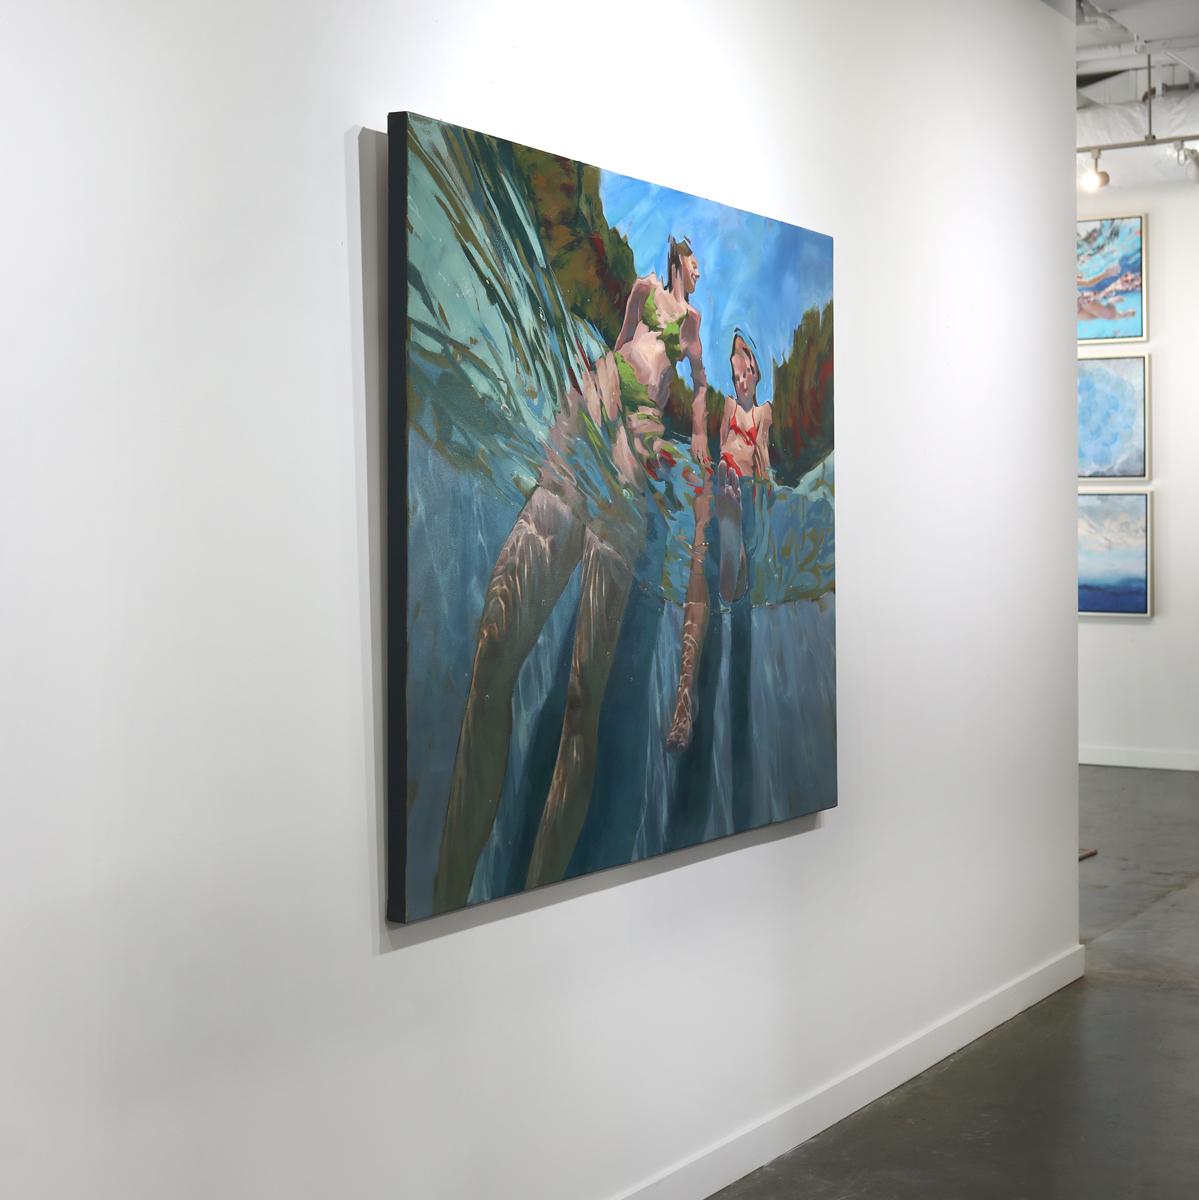 This abstract figural painting by Michele Poirier-Mozzone captures two girls, one wearing a green bikini swimsuit, the other wearing red, from beneath the surface of water. The viewer looks upward at the two figures, who sit on the edge of the water